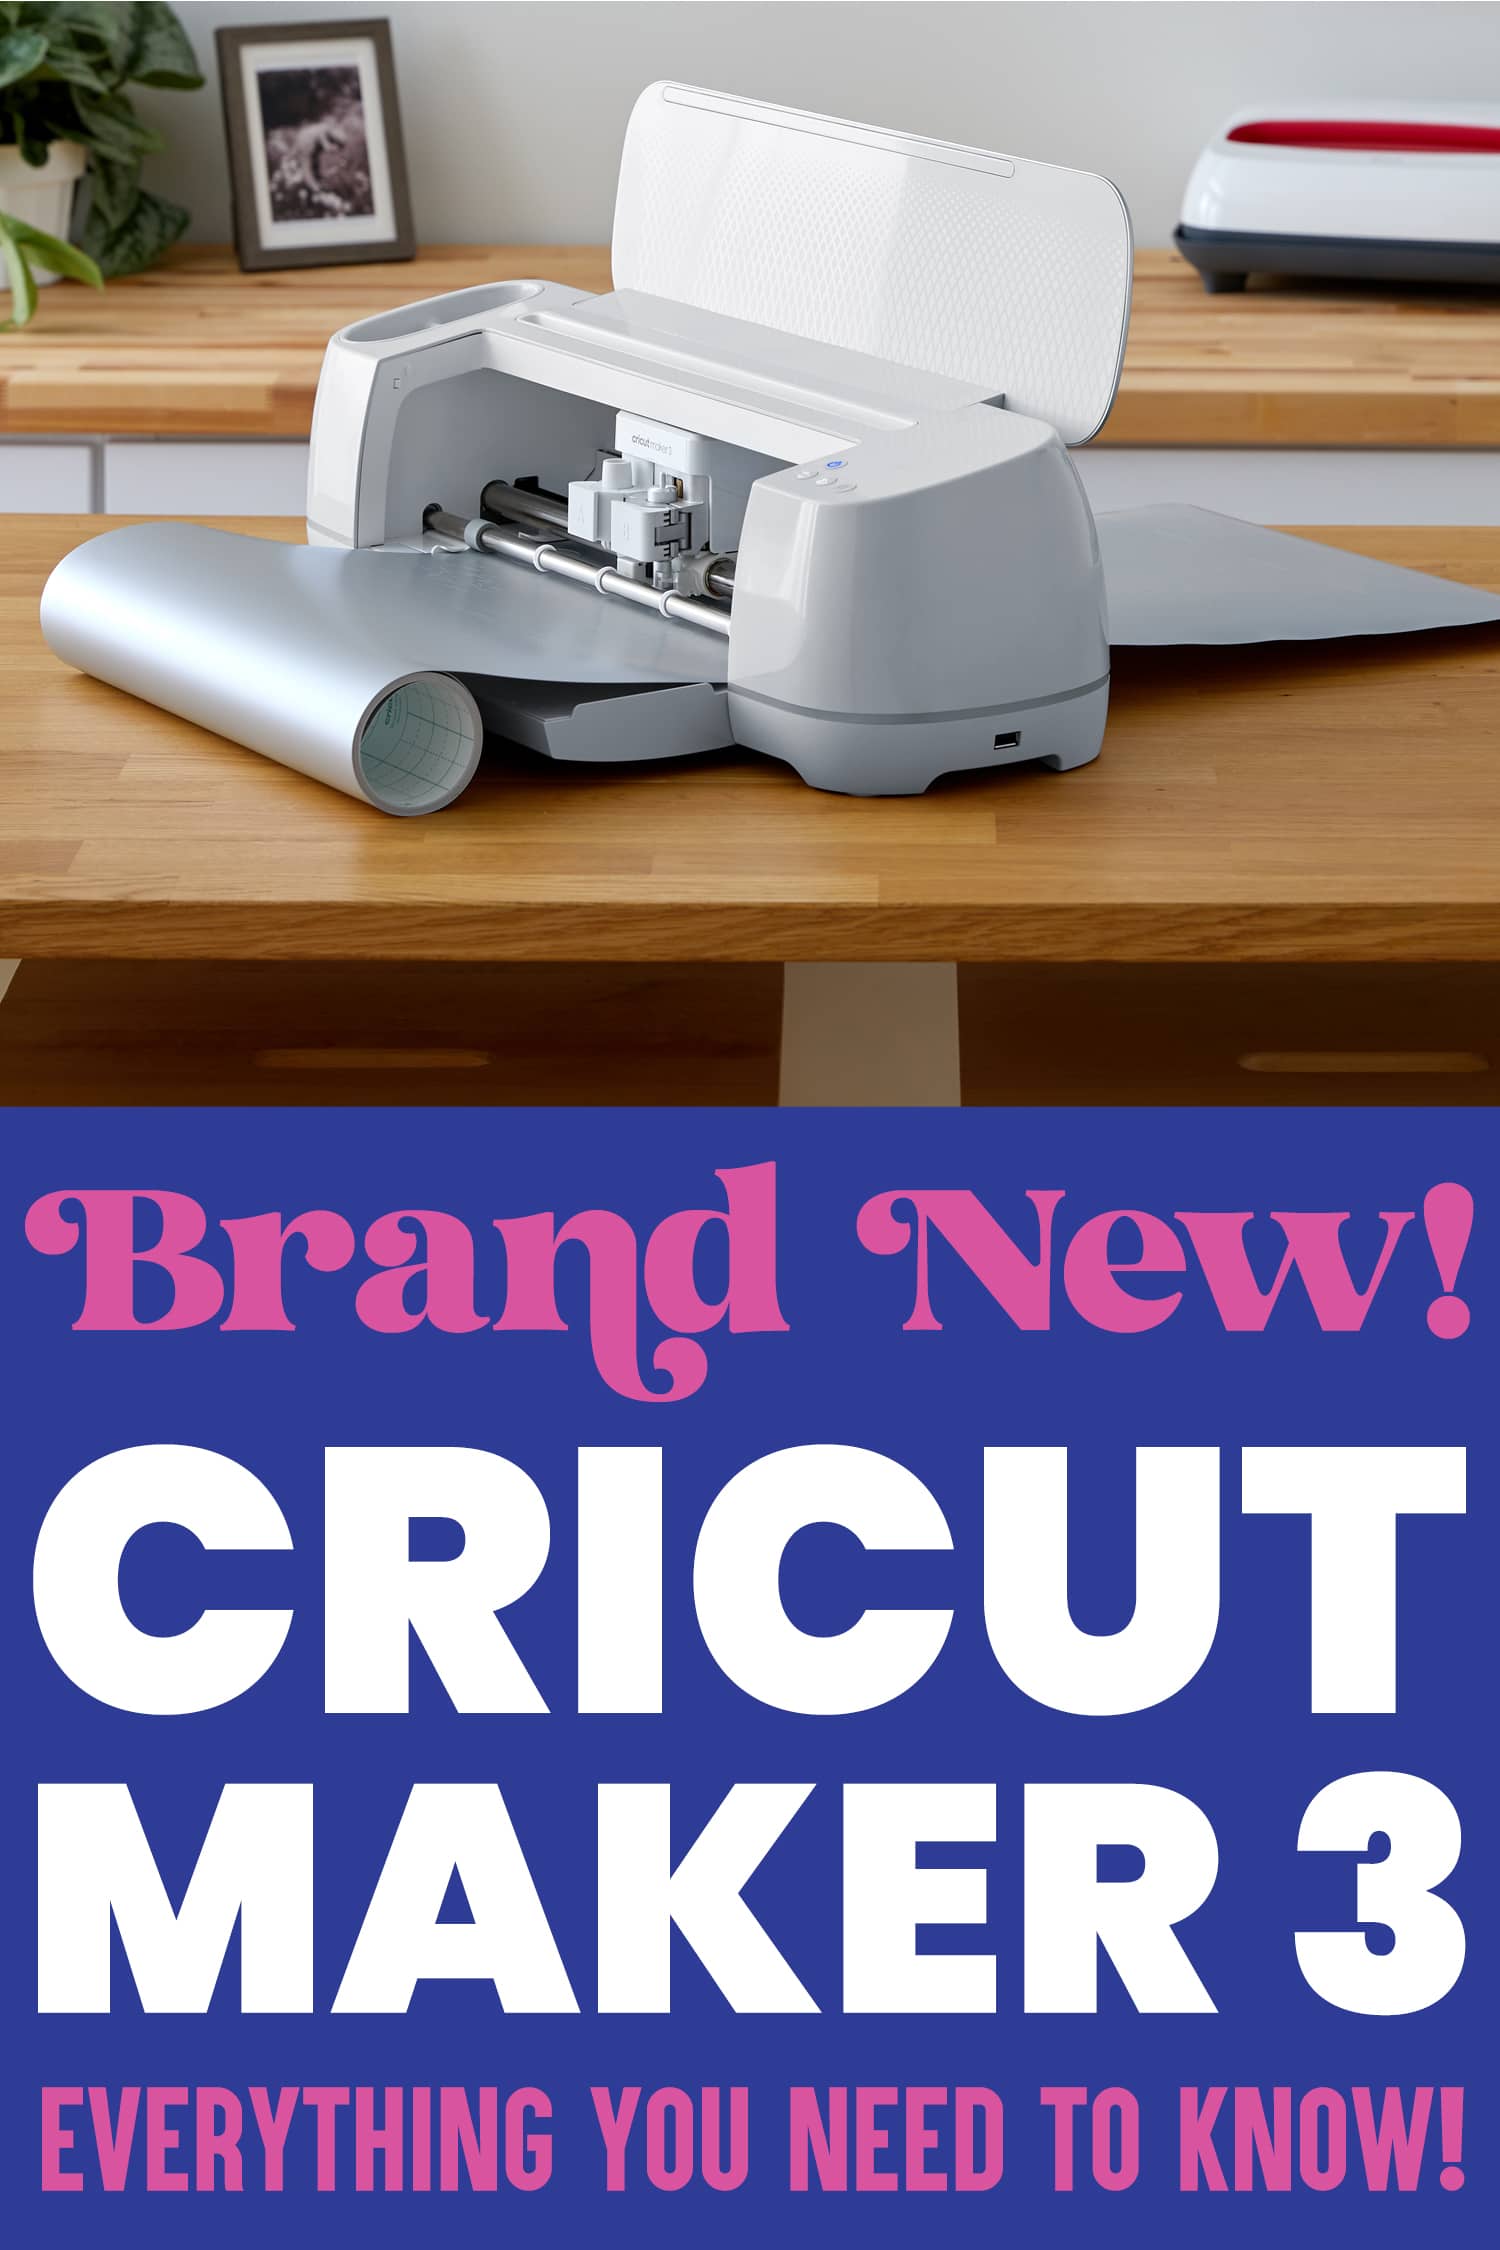 Cricut Maker 3: What’s New + What Can It Do?